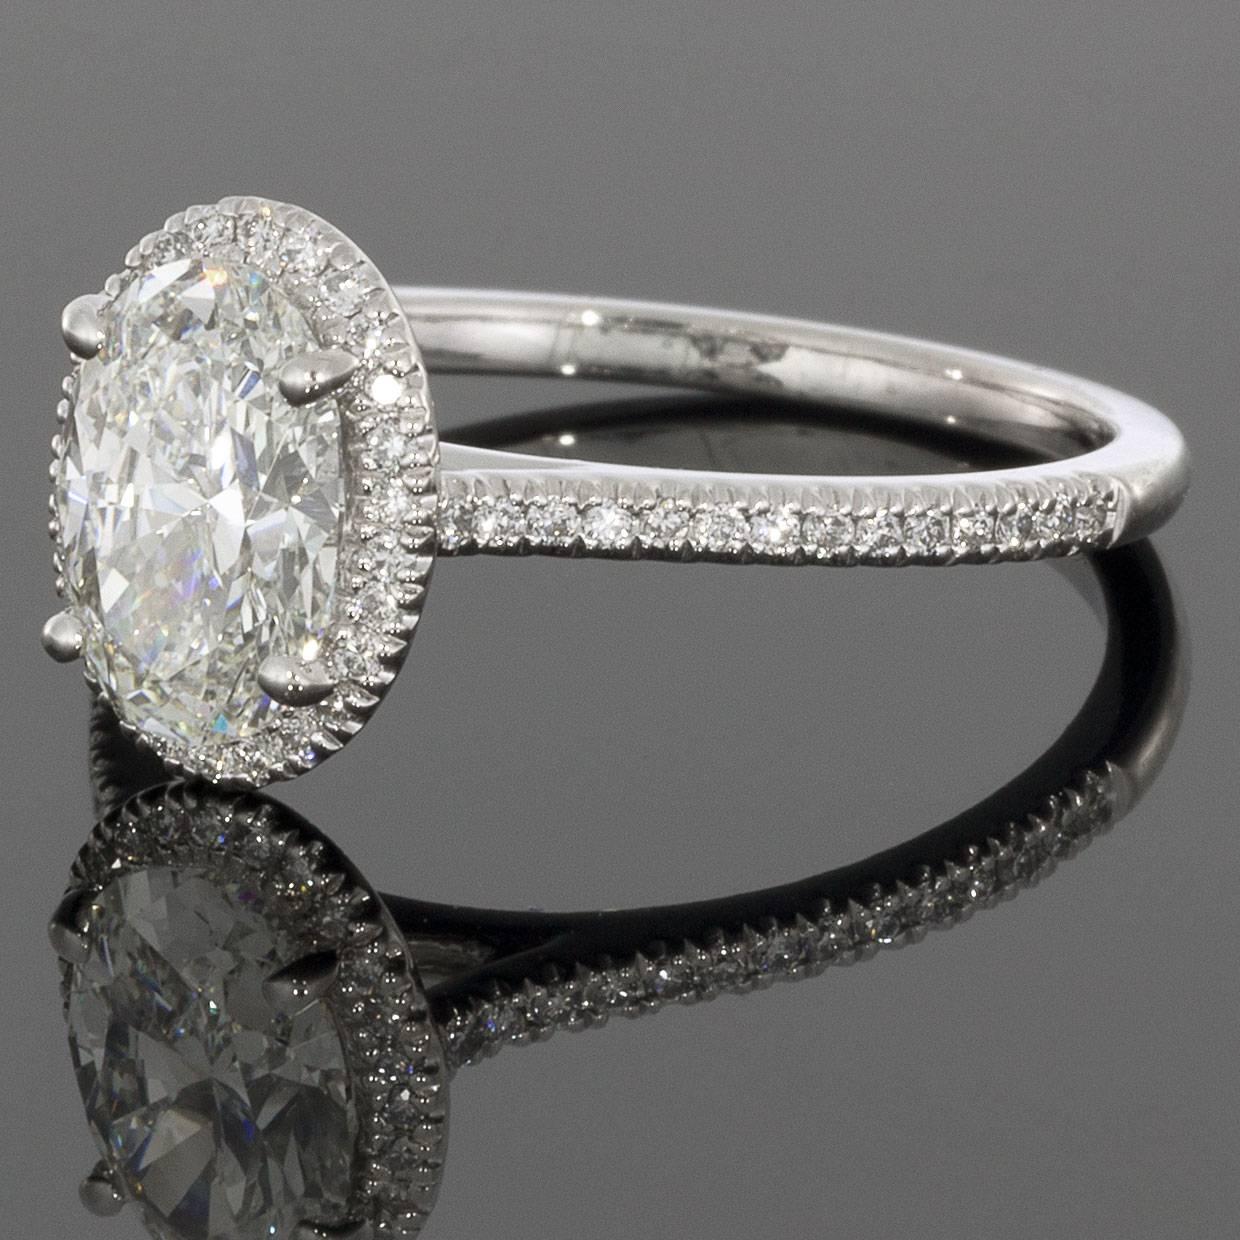 This gorgeous ring features an amazing 1.19 carat oval brilliant center diamond that is GIA certified to be H/VVS2 in quality. The ring's 54 accent diamonds have a combined total weight of .17 carat, giving the complete ring a combined total weight